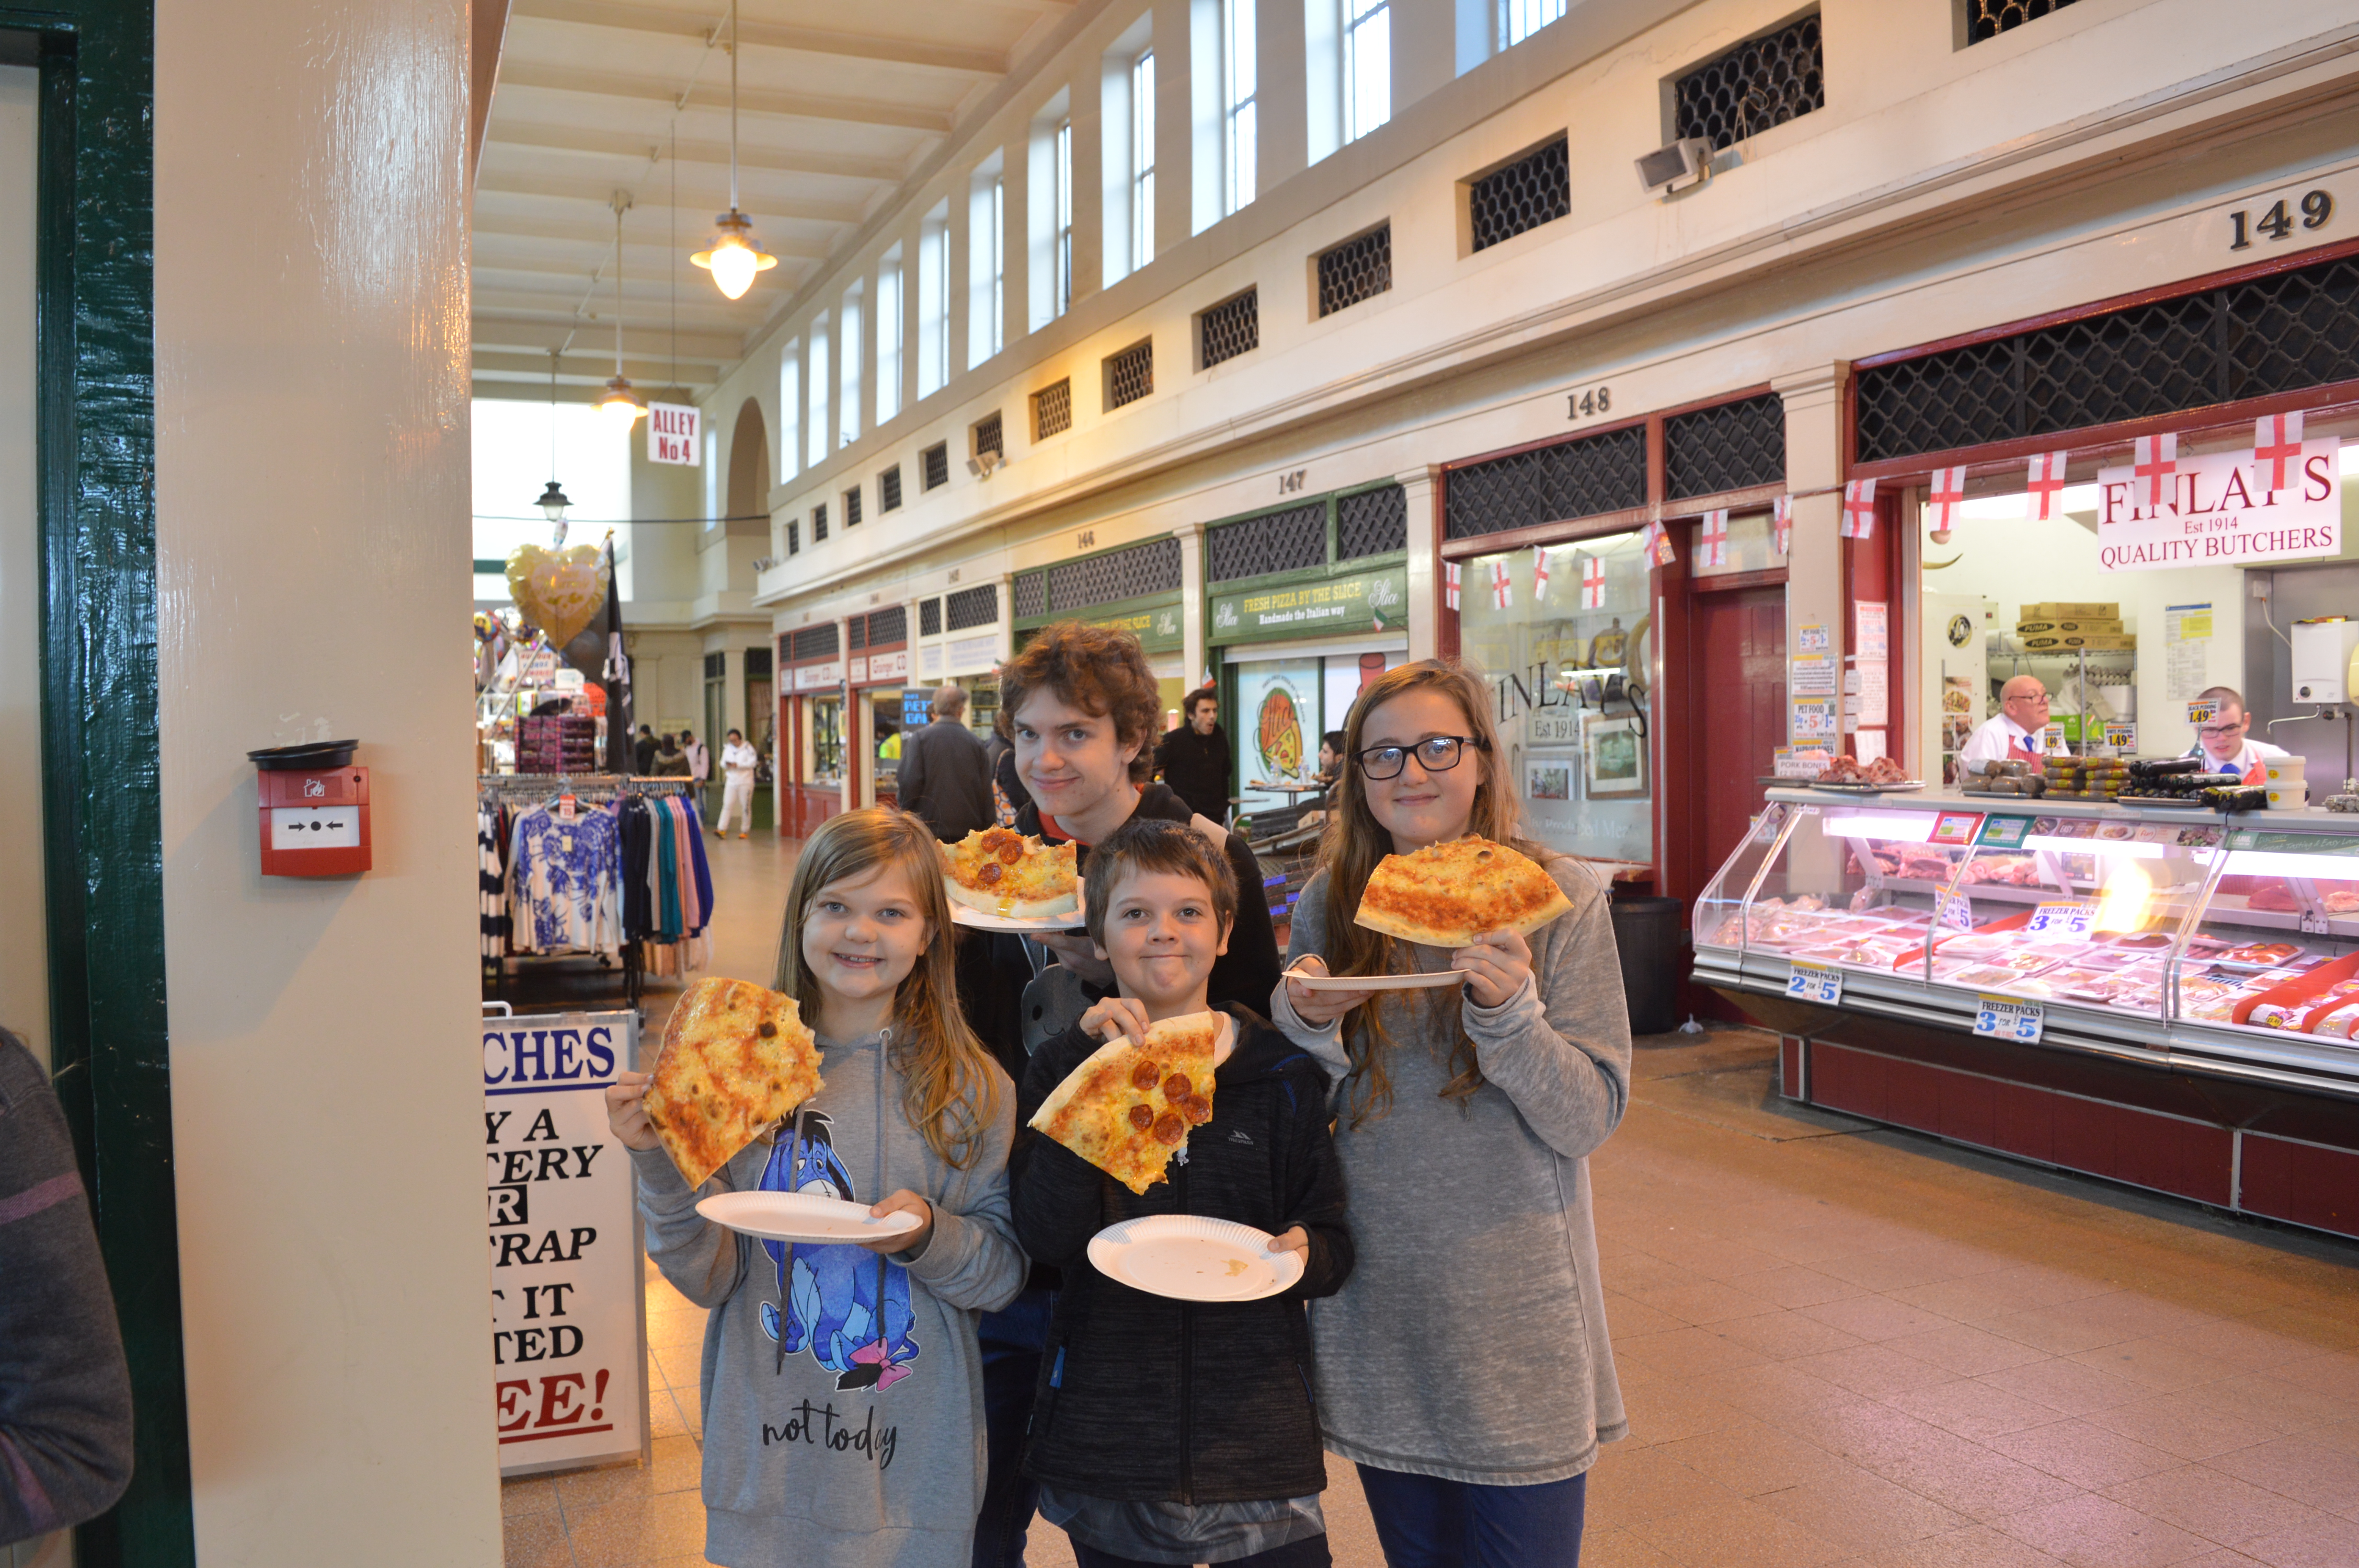 A day trip to Newcastle inside the Grainger Market and giant pizza slices